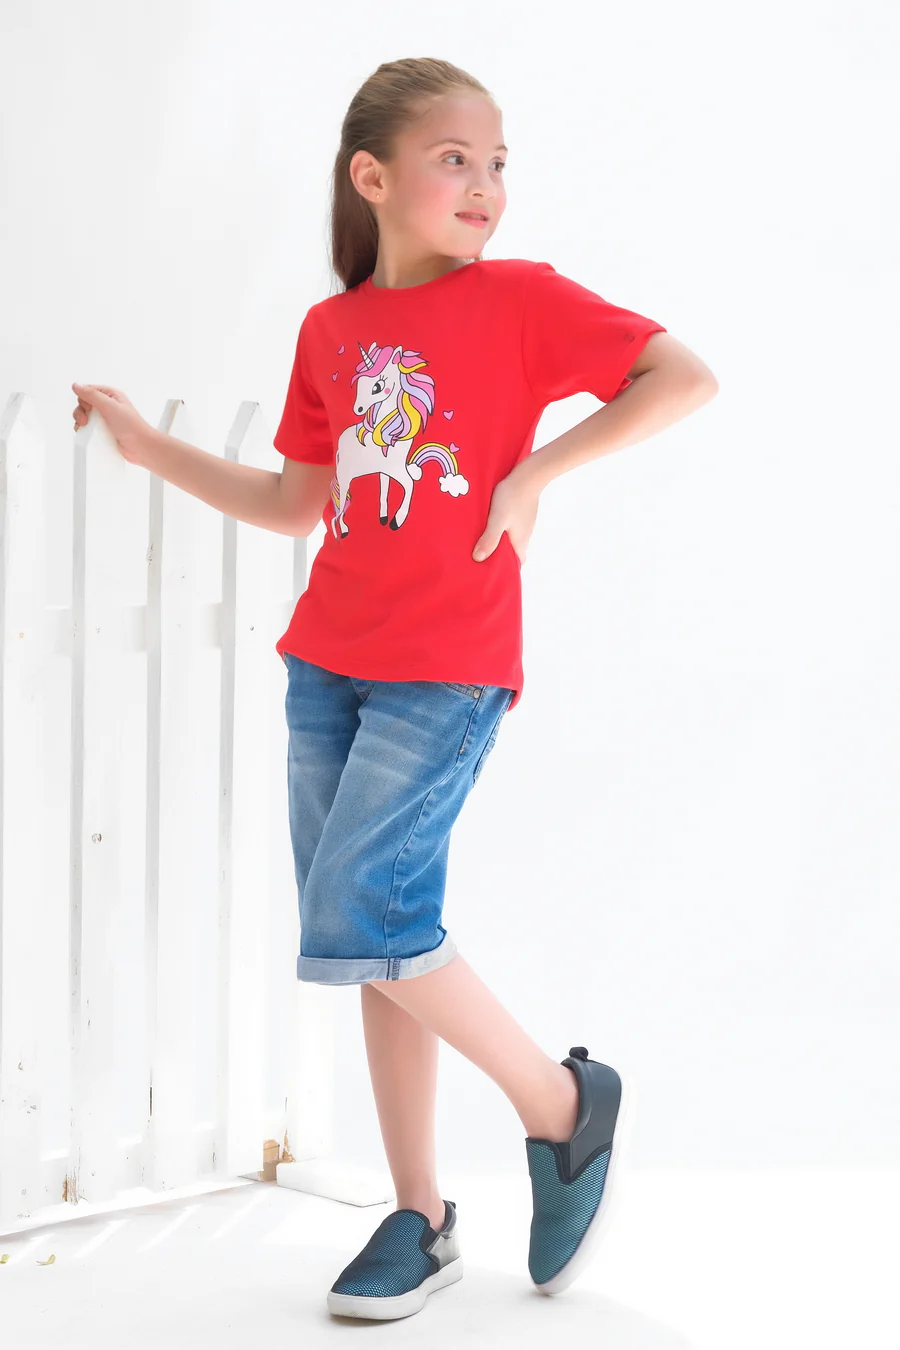 Unicorn - Half Sleeves T-Shirts For Kids - Red - SBT-348